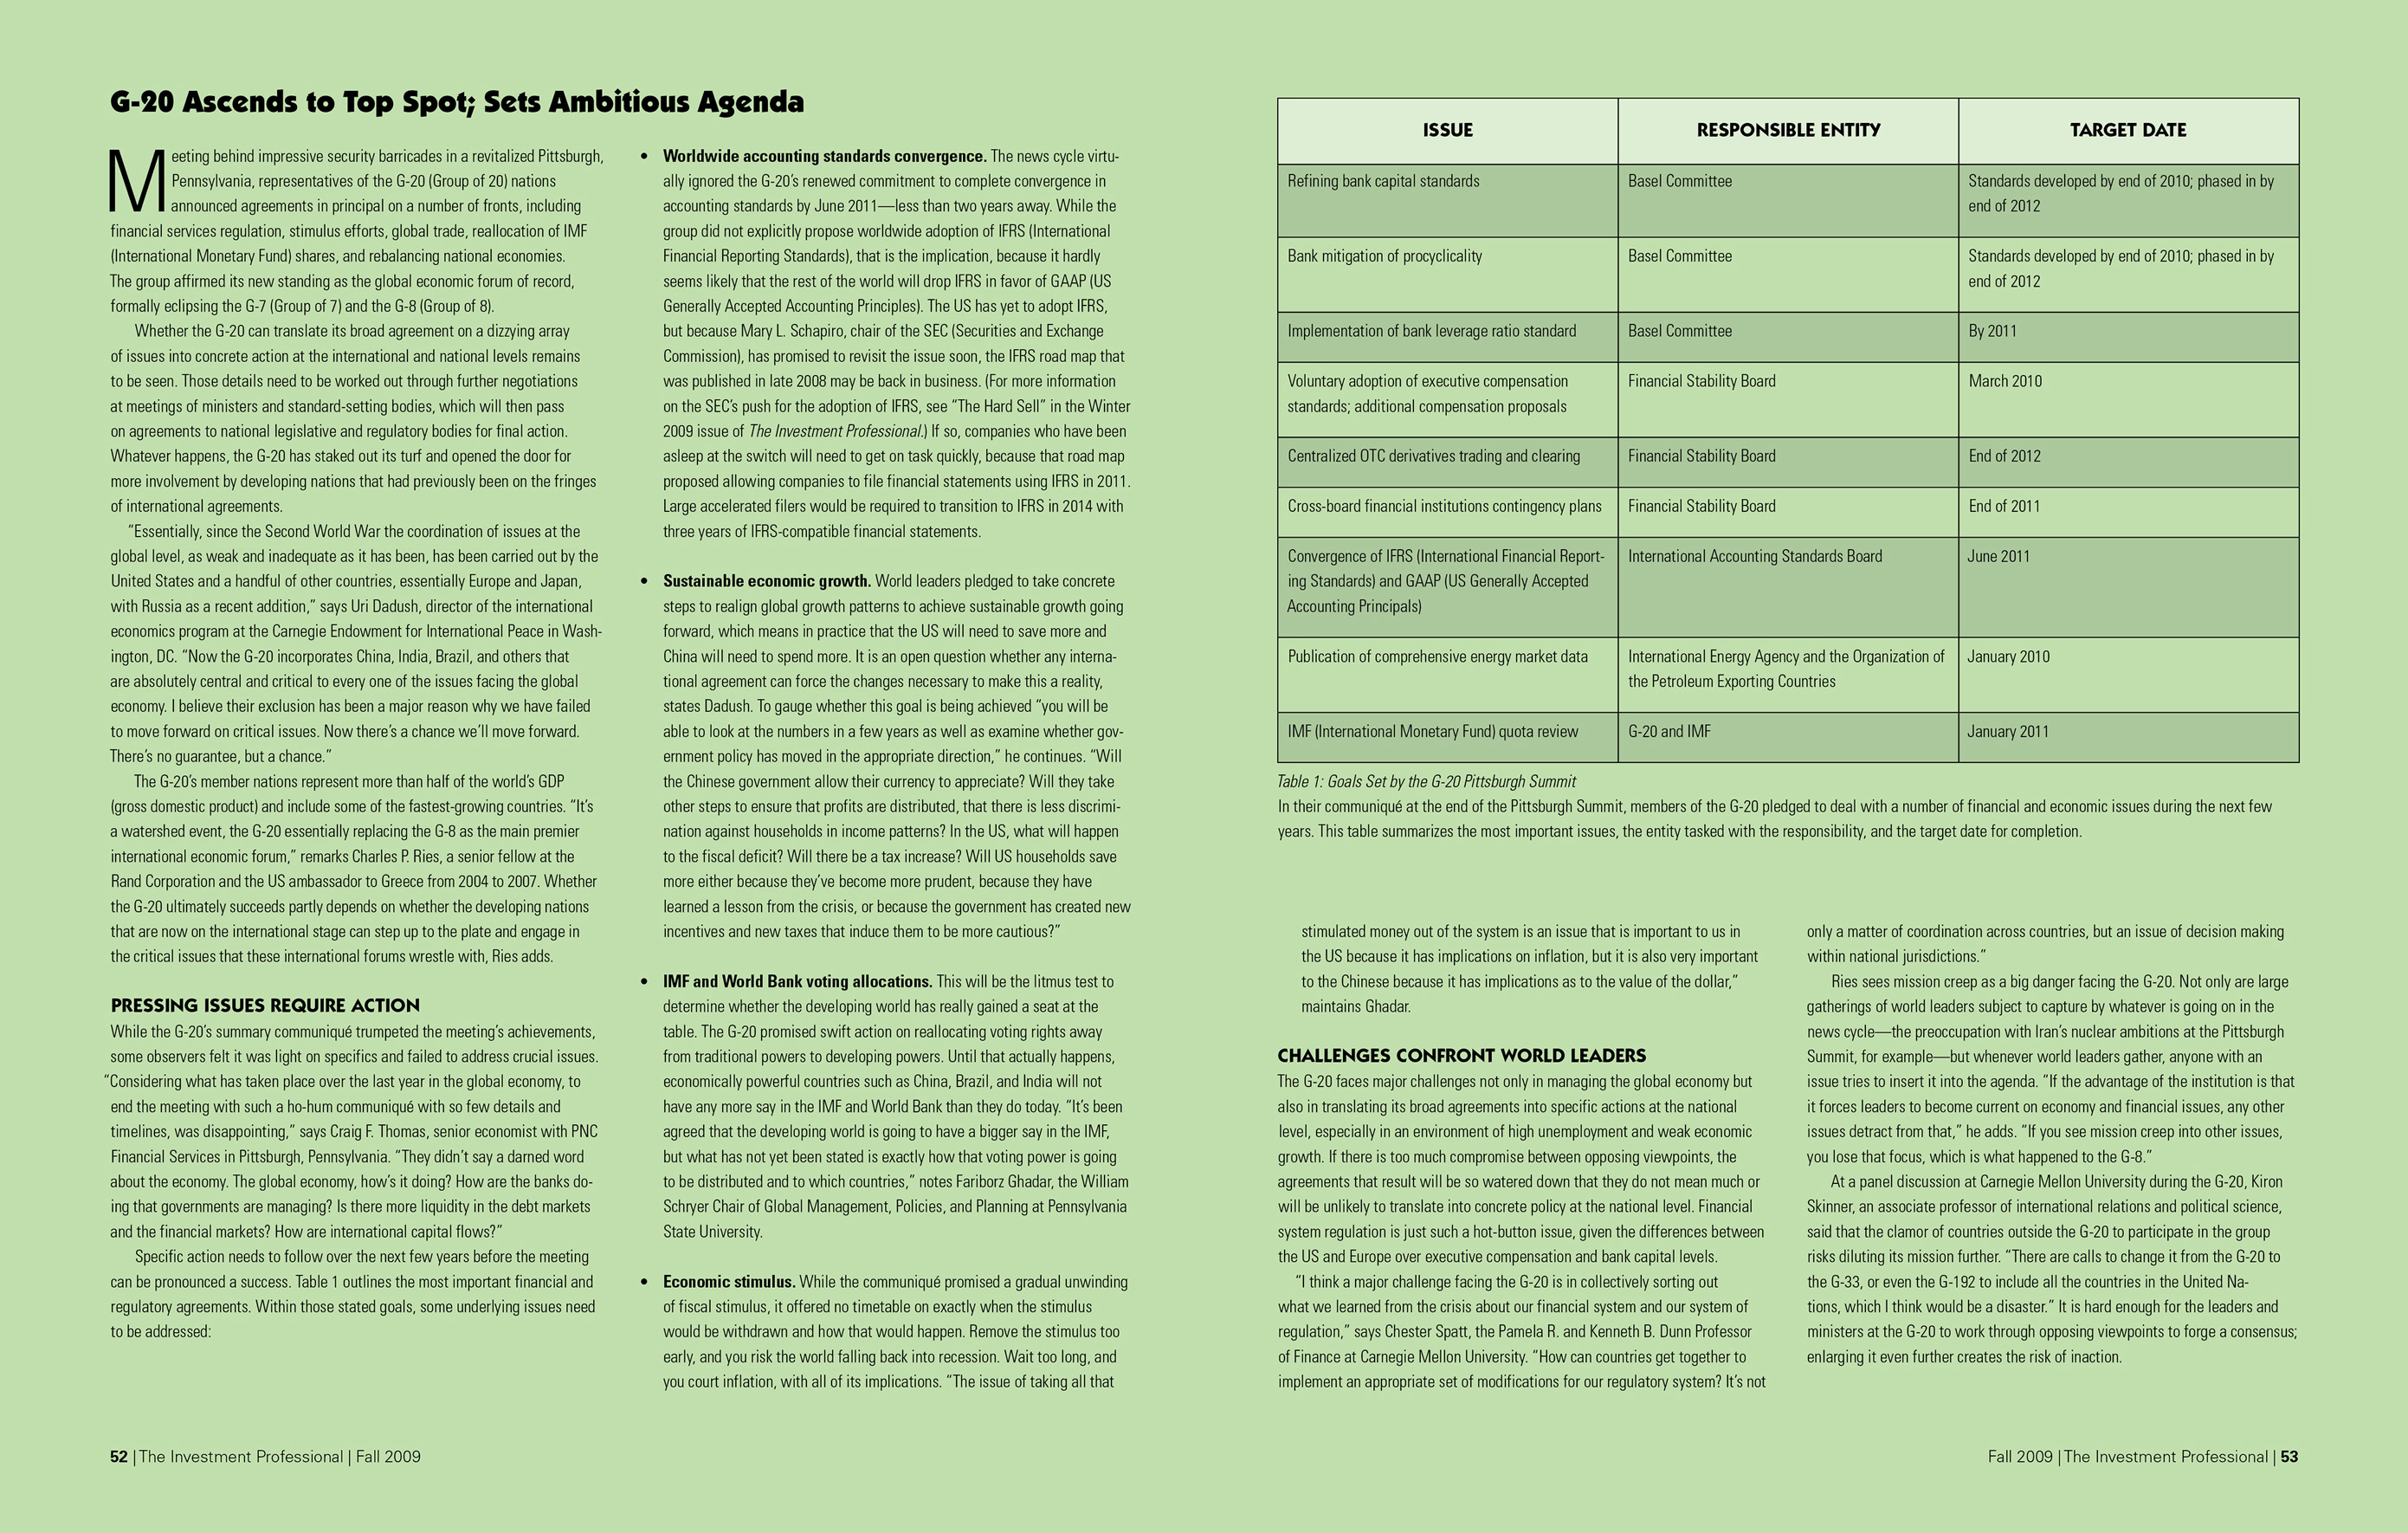 Fifth spread of the article in The Investment Professional magazine titled 'Mending the Seams.' It is a two-page sidebar titled 'G-20 Ascends to Top Spot; Sets Ambitious Agenda,' and includes a table on issues, responsible entities, and target dates.